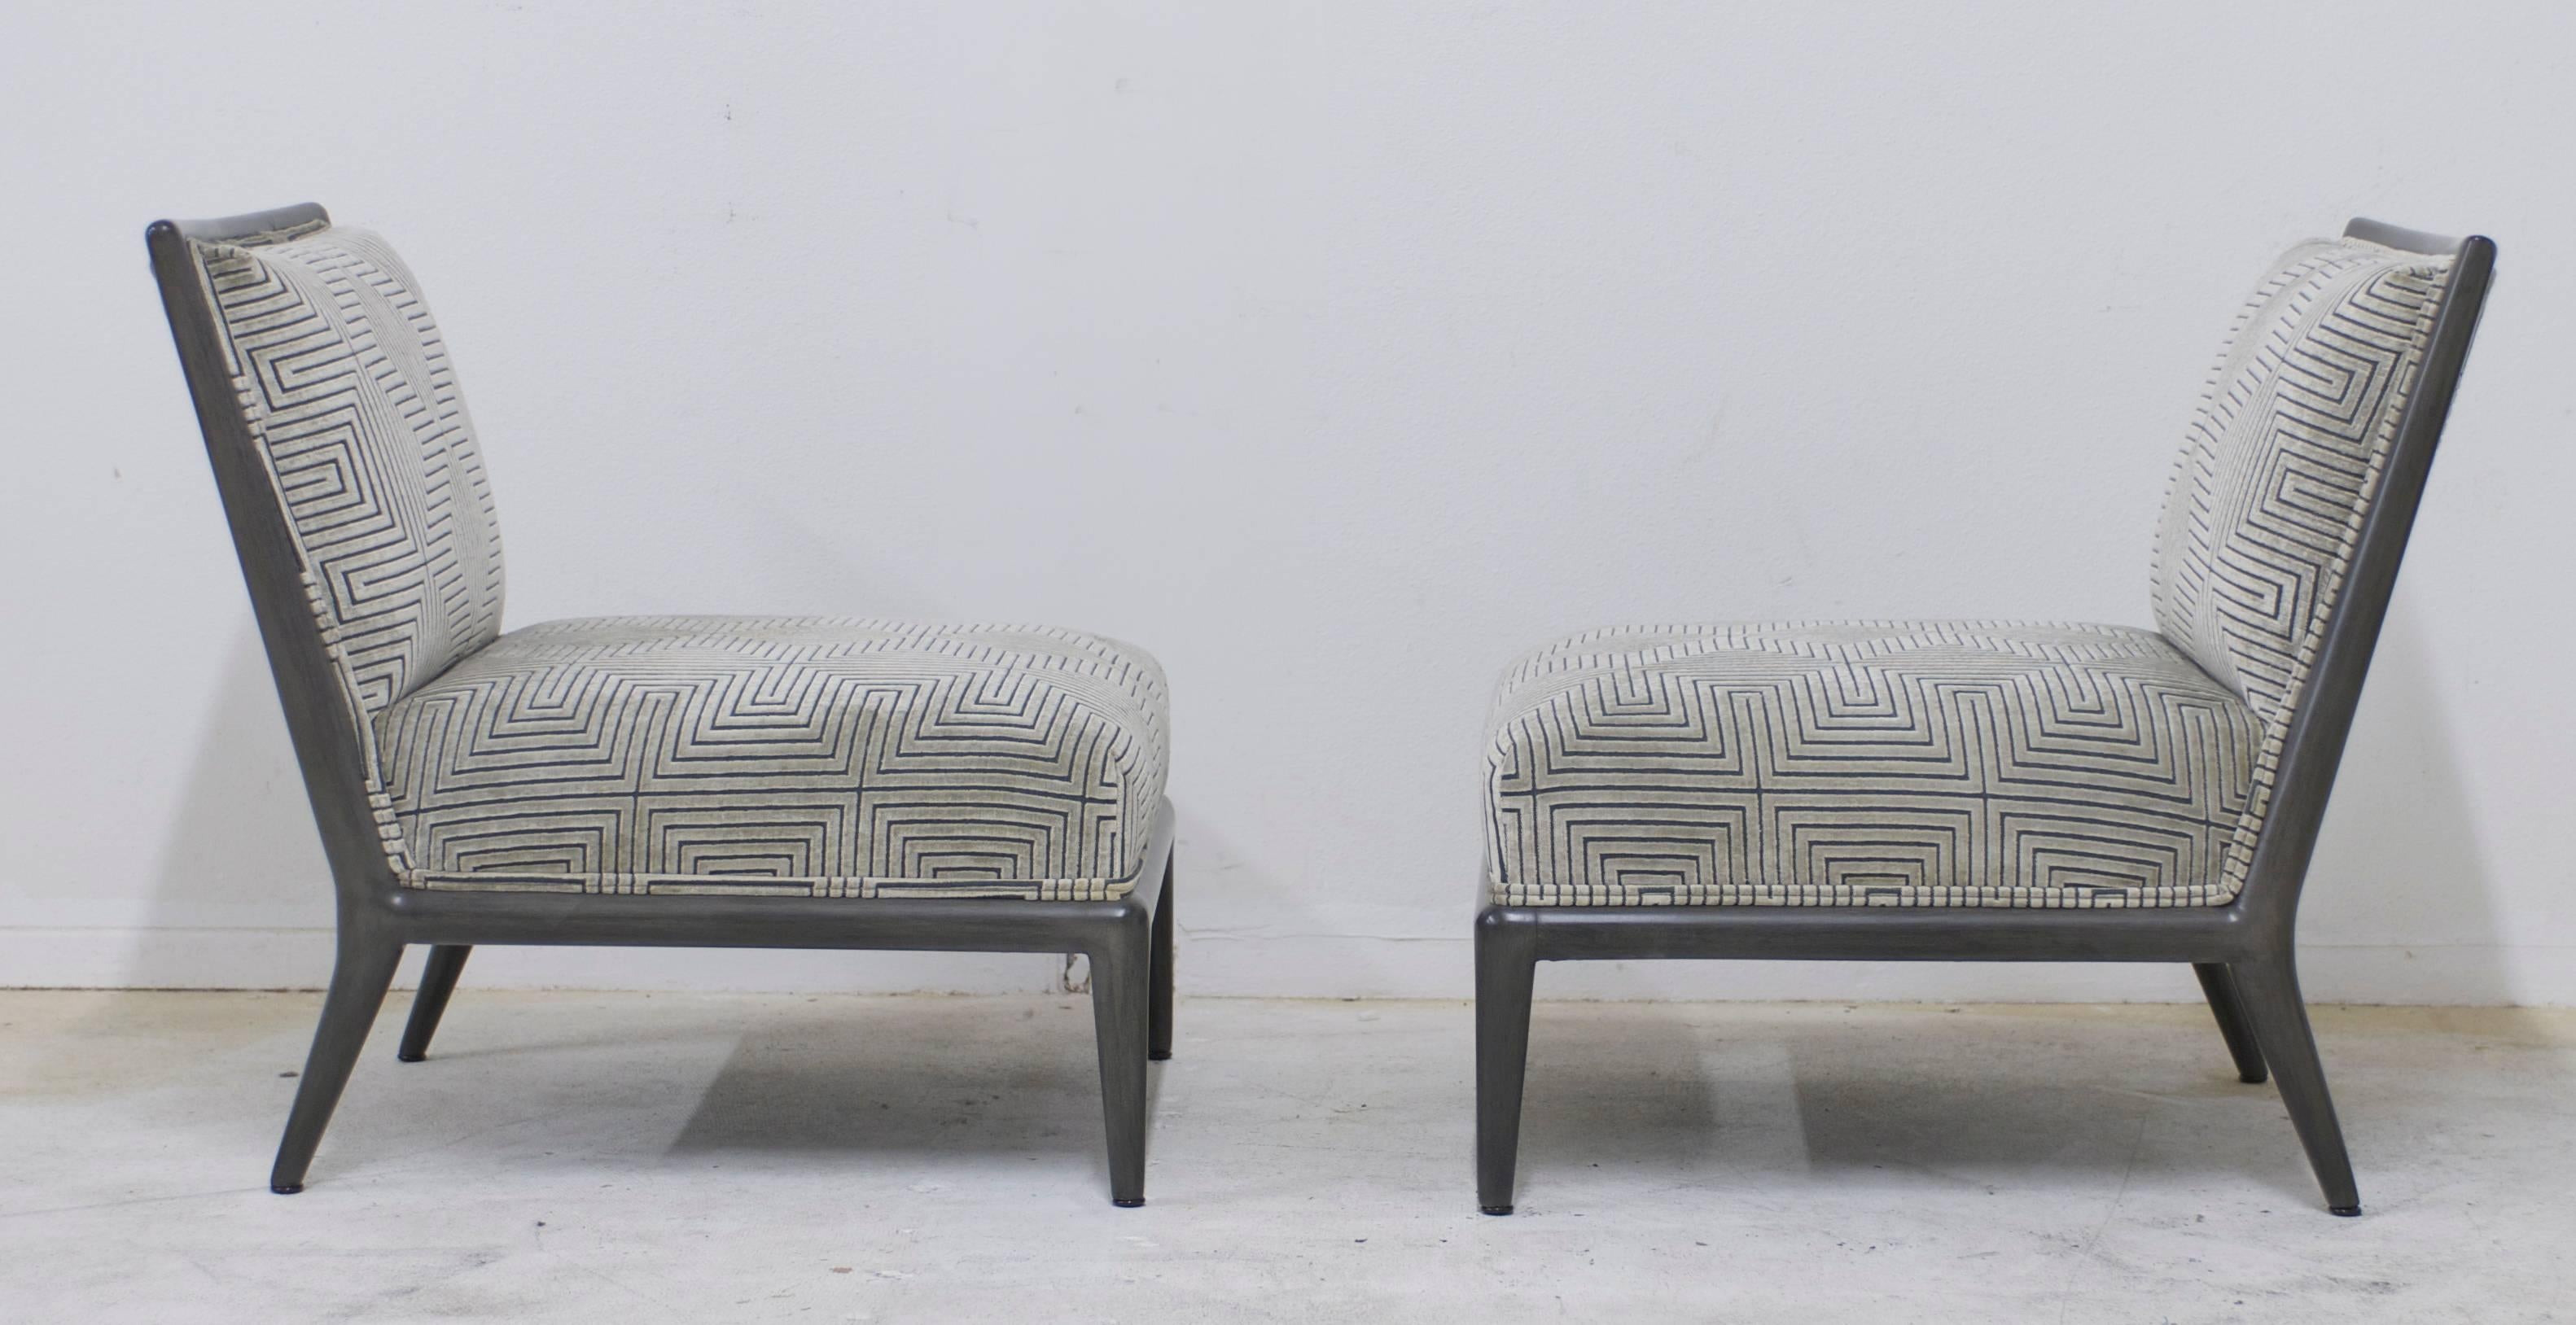 This pair of low slung Mid-Century slipper chairs have had their frames refinished in a deep charcoal grey finish that has a brushed stain layered on top to give the finish depth. The uphostery has been redone in a geometric cut velvet pattern that